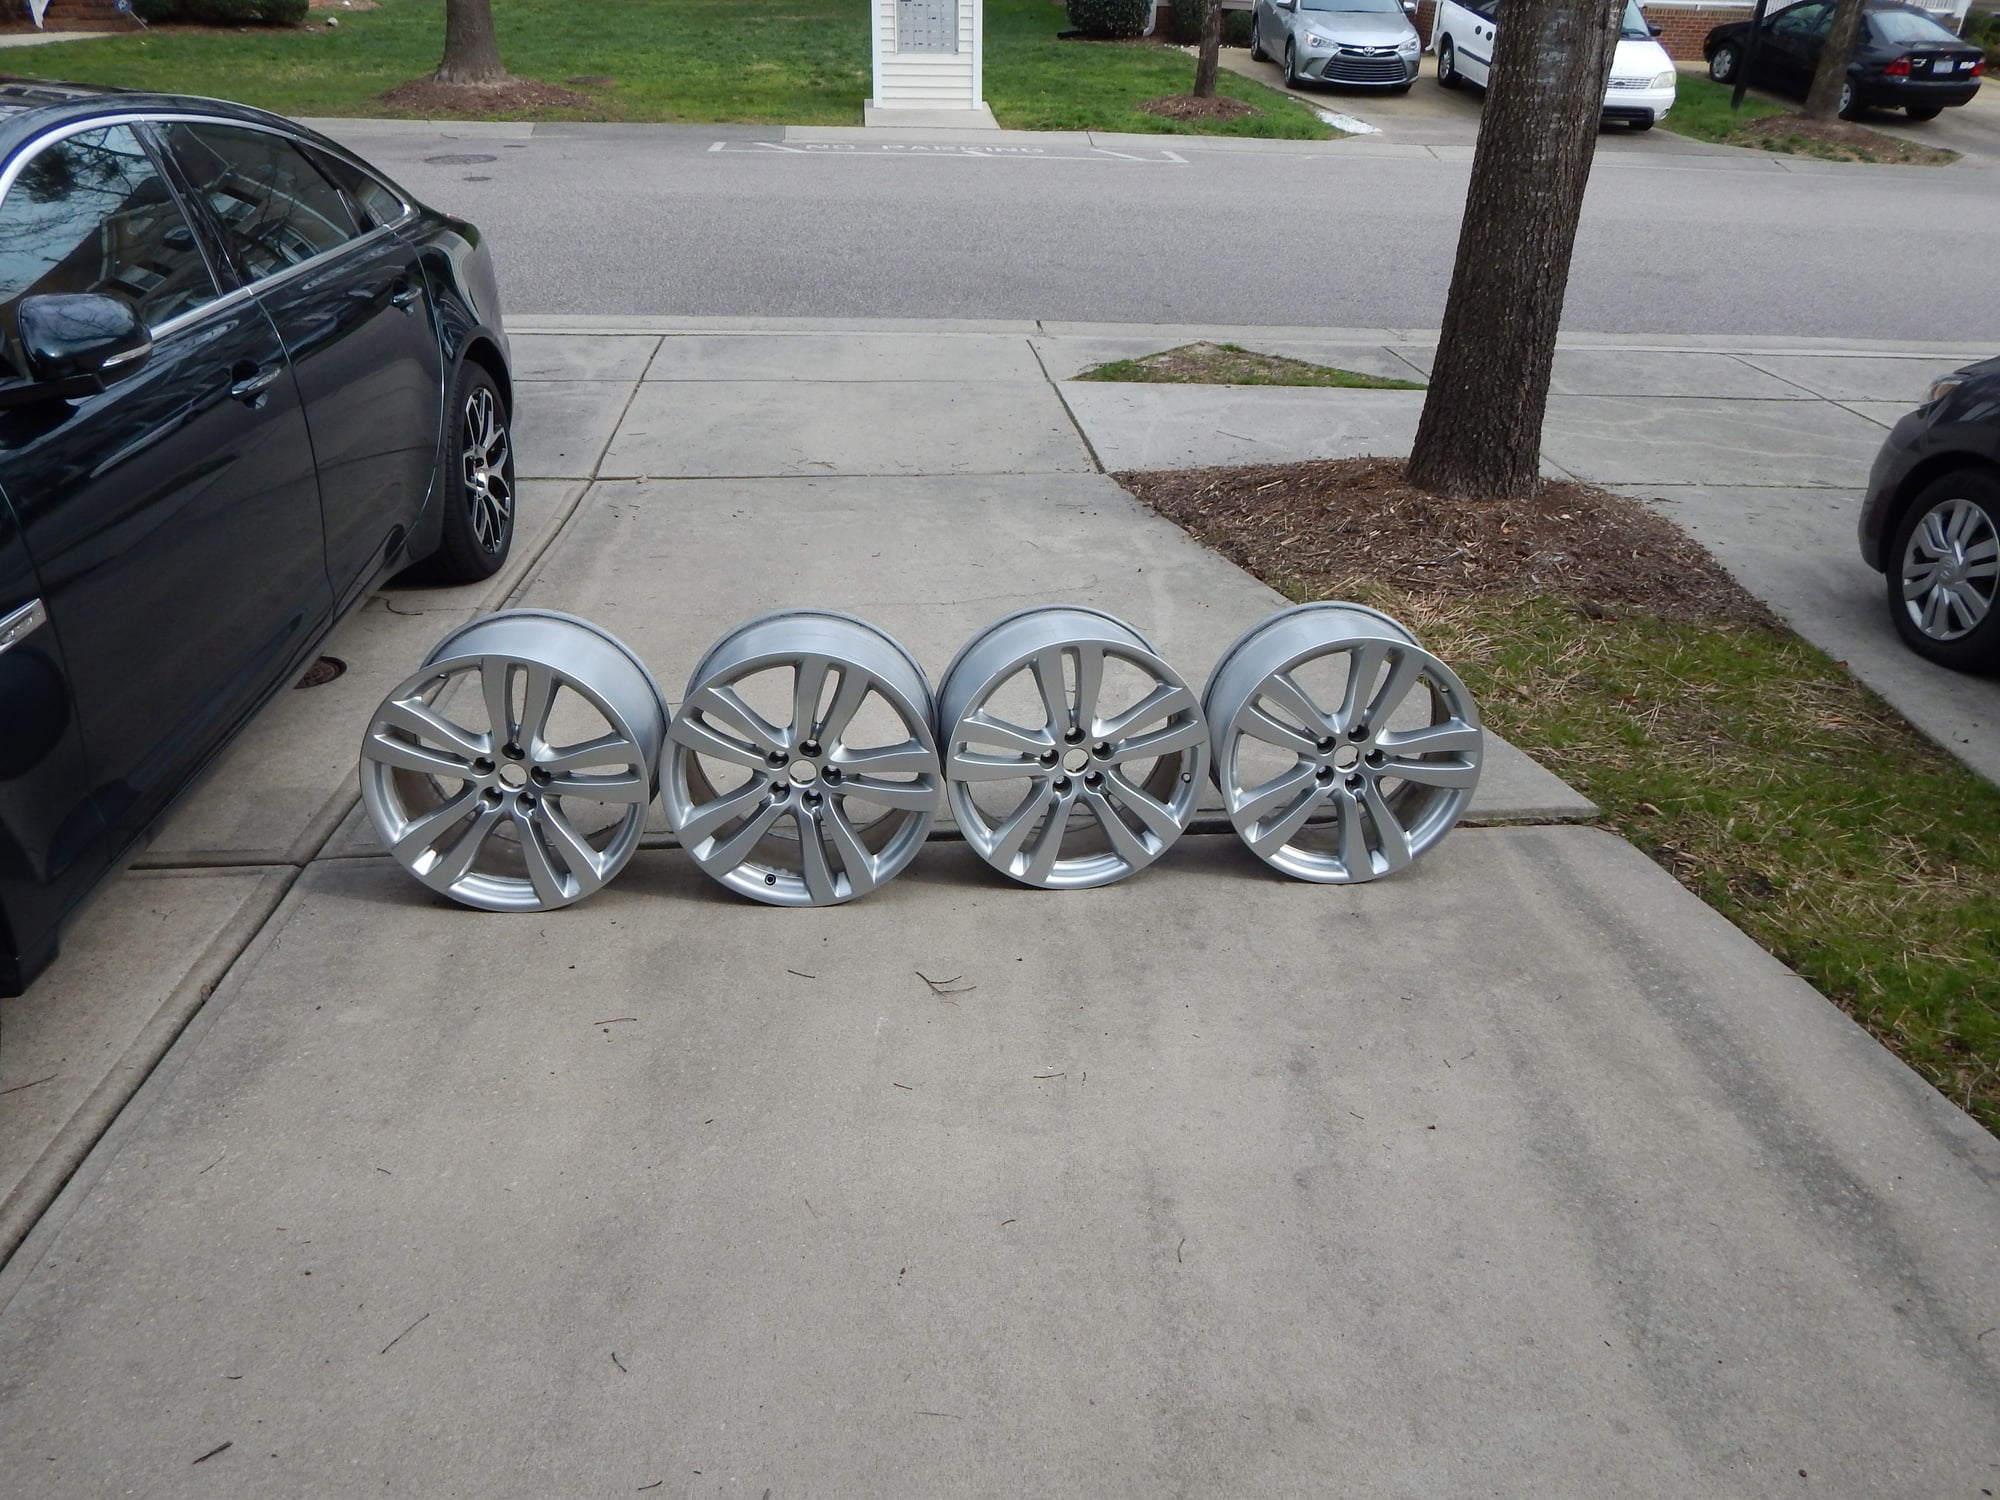 Wheels and Tires/Axles - 19 inch TOBA wheels - Used - 2010 to 2019 Jaguar XJ - Raleigh, NC 27616, United States